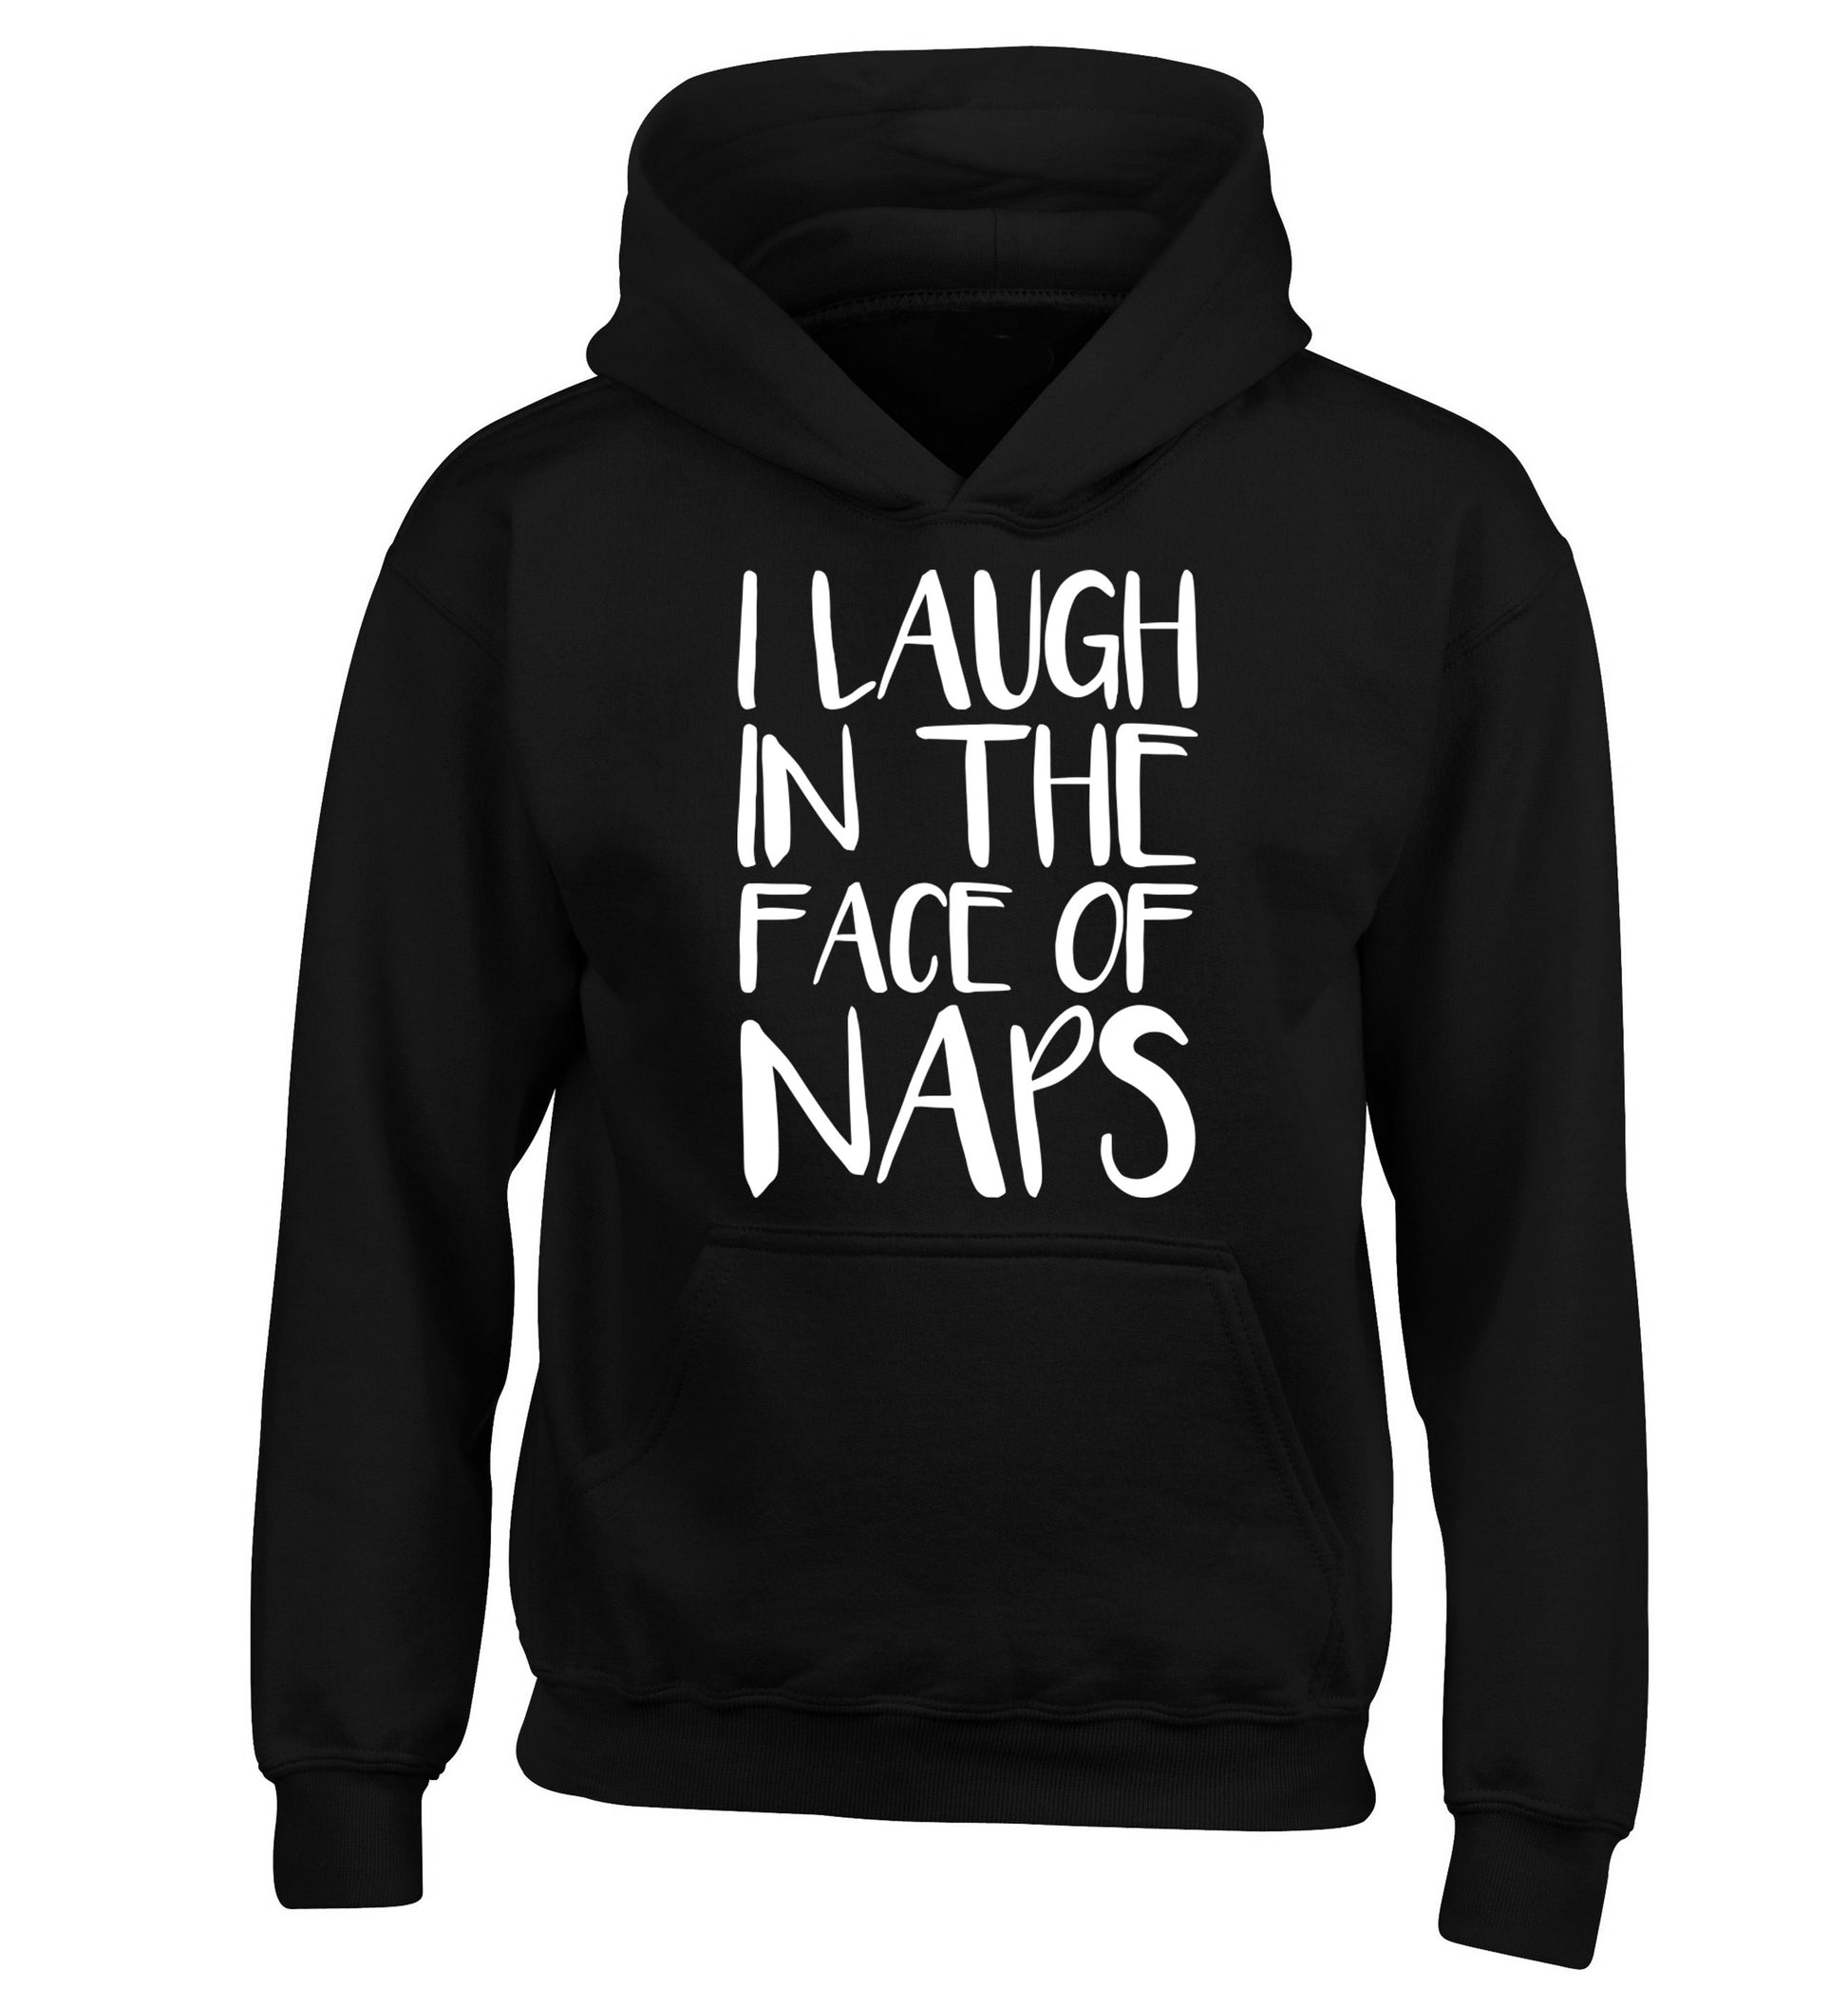 I laugh in the face of naps children's black hoodie 12-14 Years